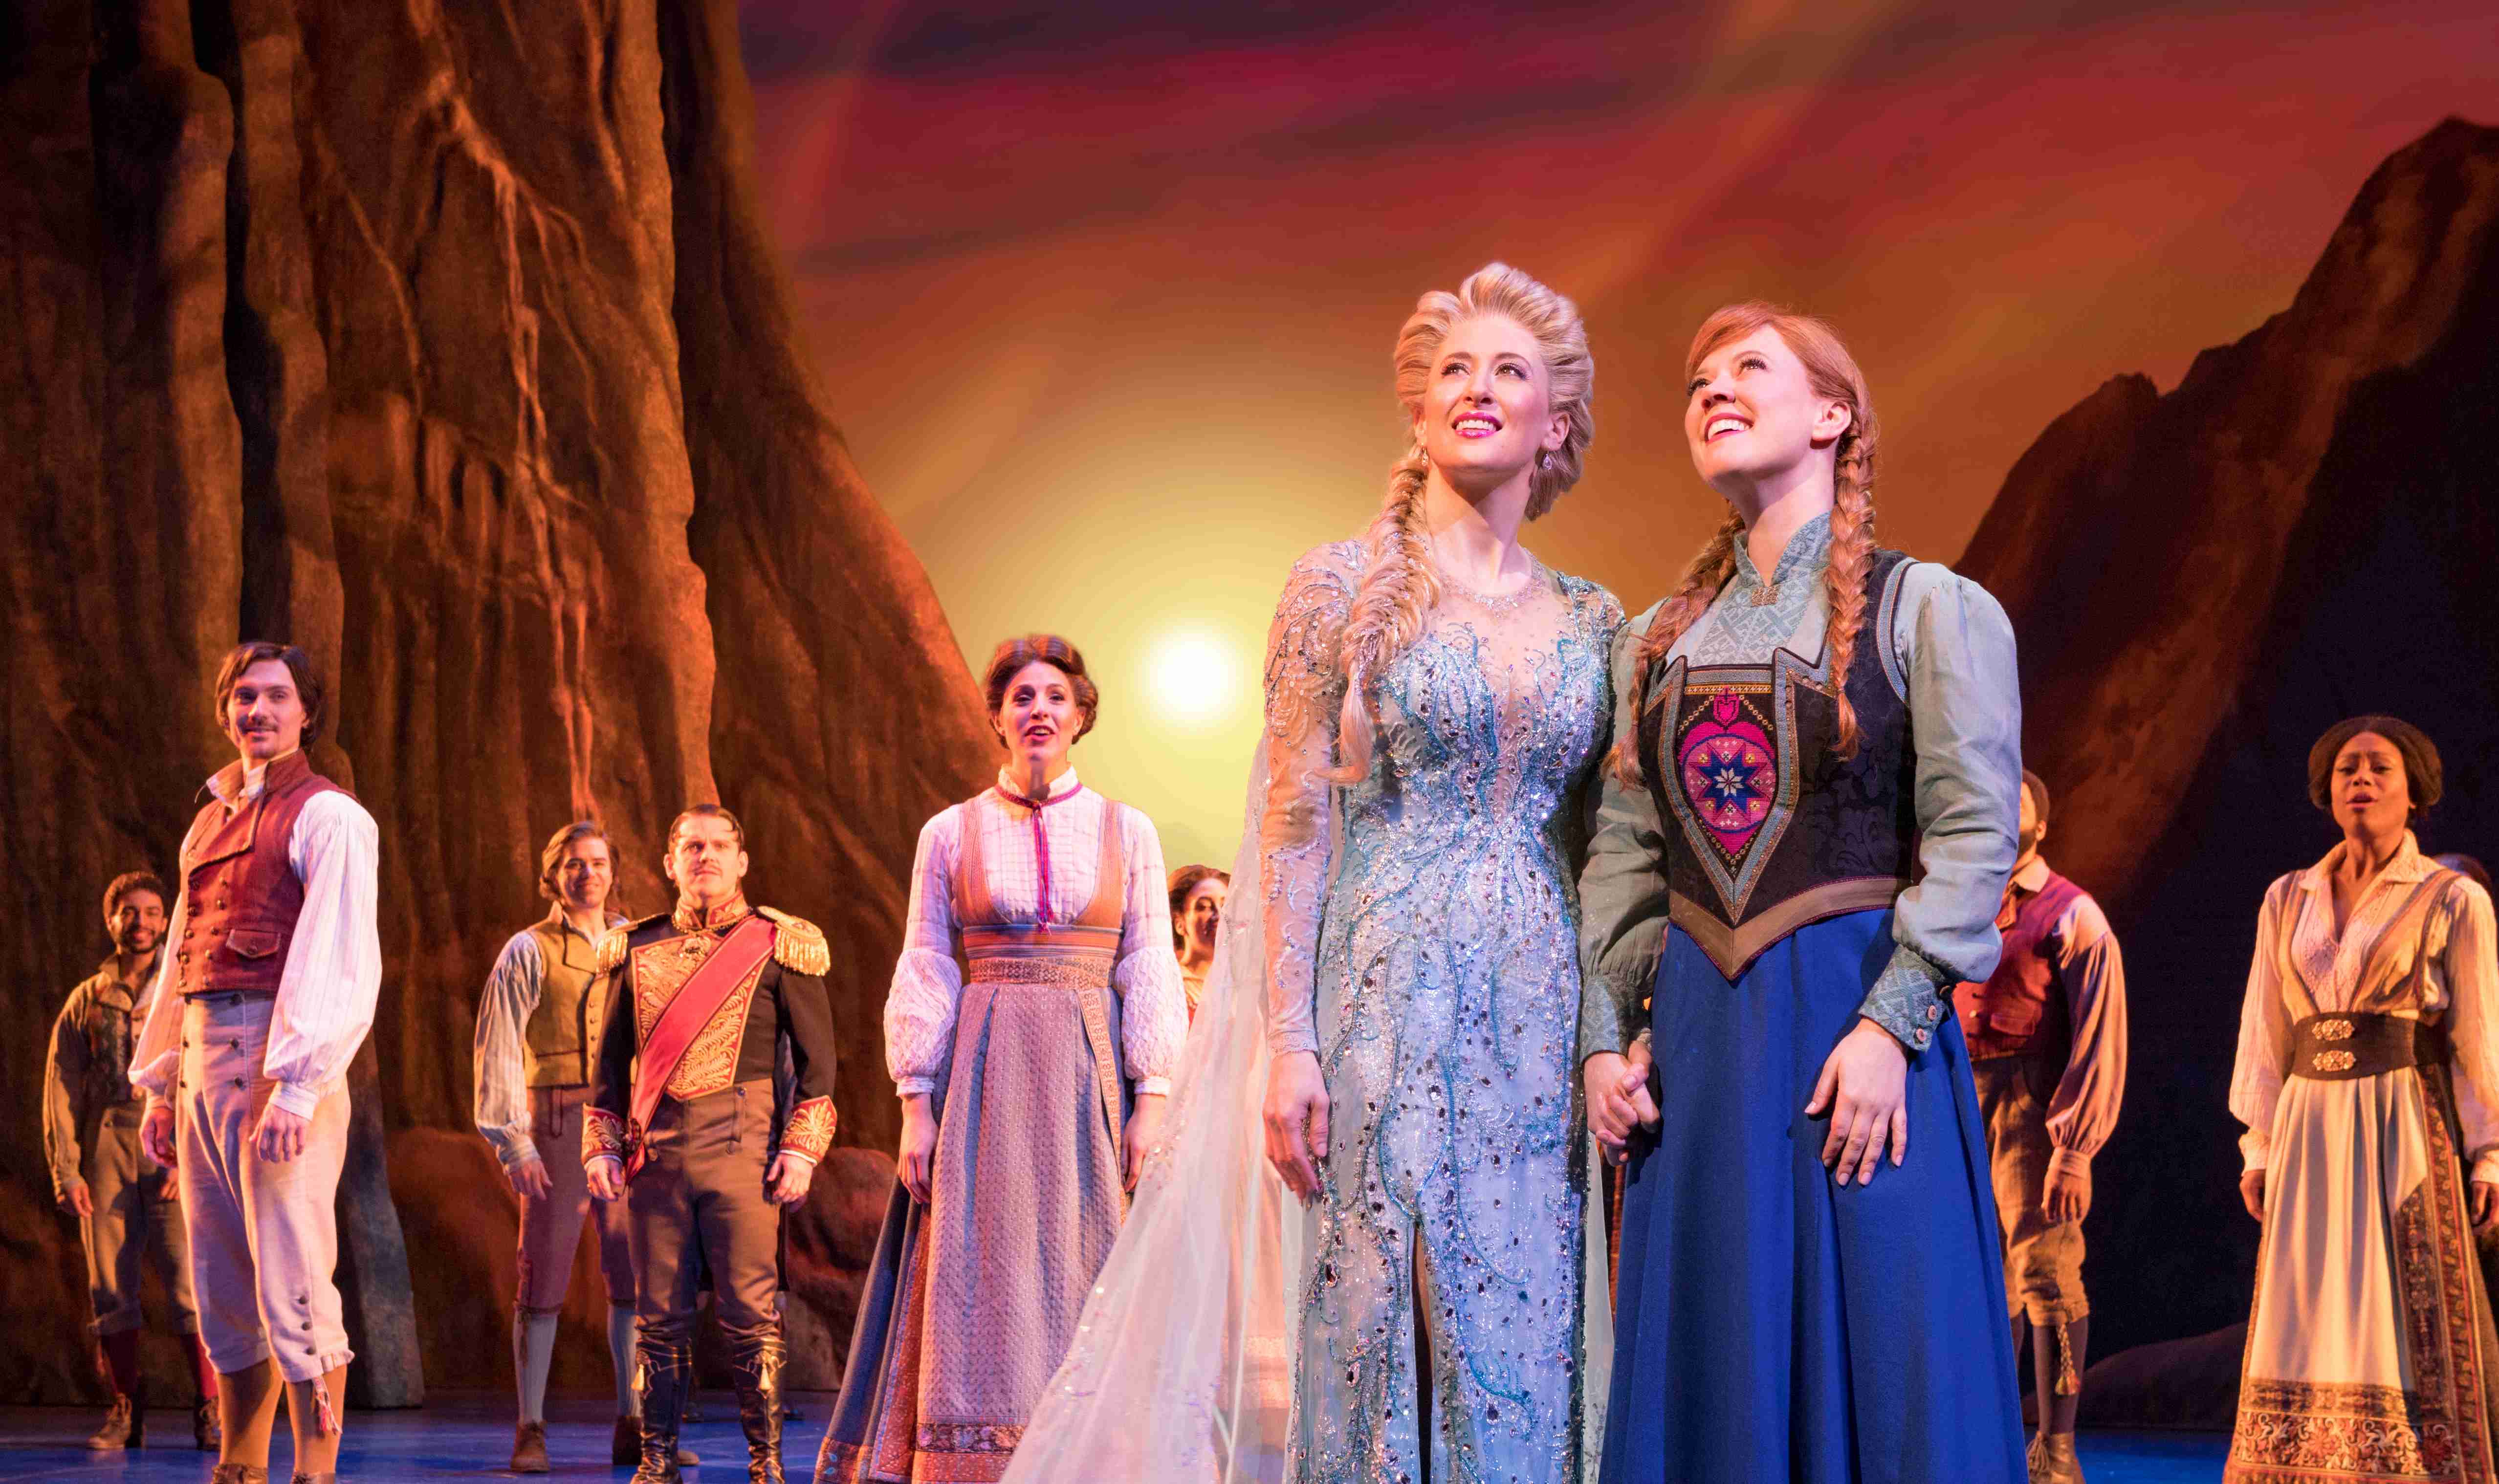 Caissie Levy (Elsa), Patti Murin (Anna) and the Company of FROZEN on Broadway. Photo by Deen van Meer